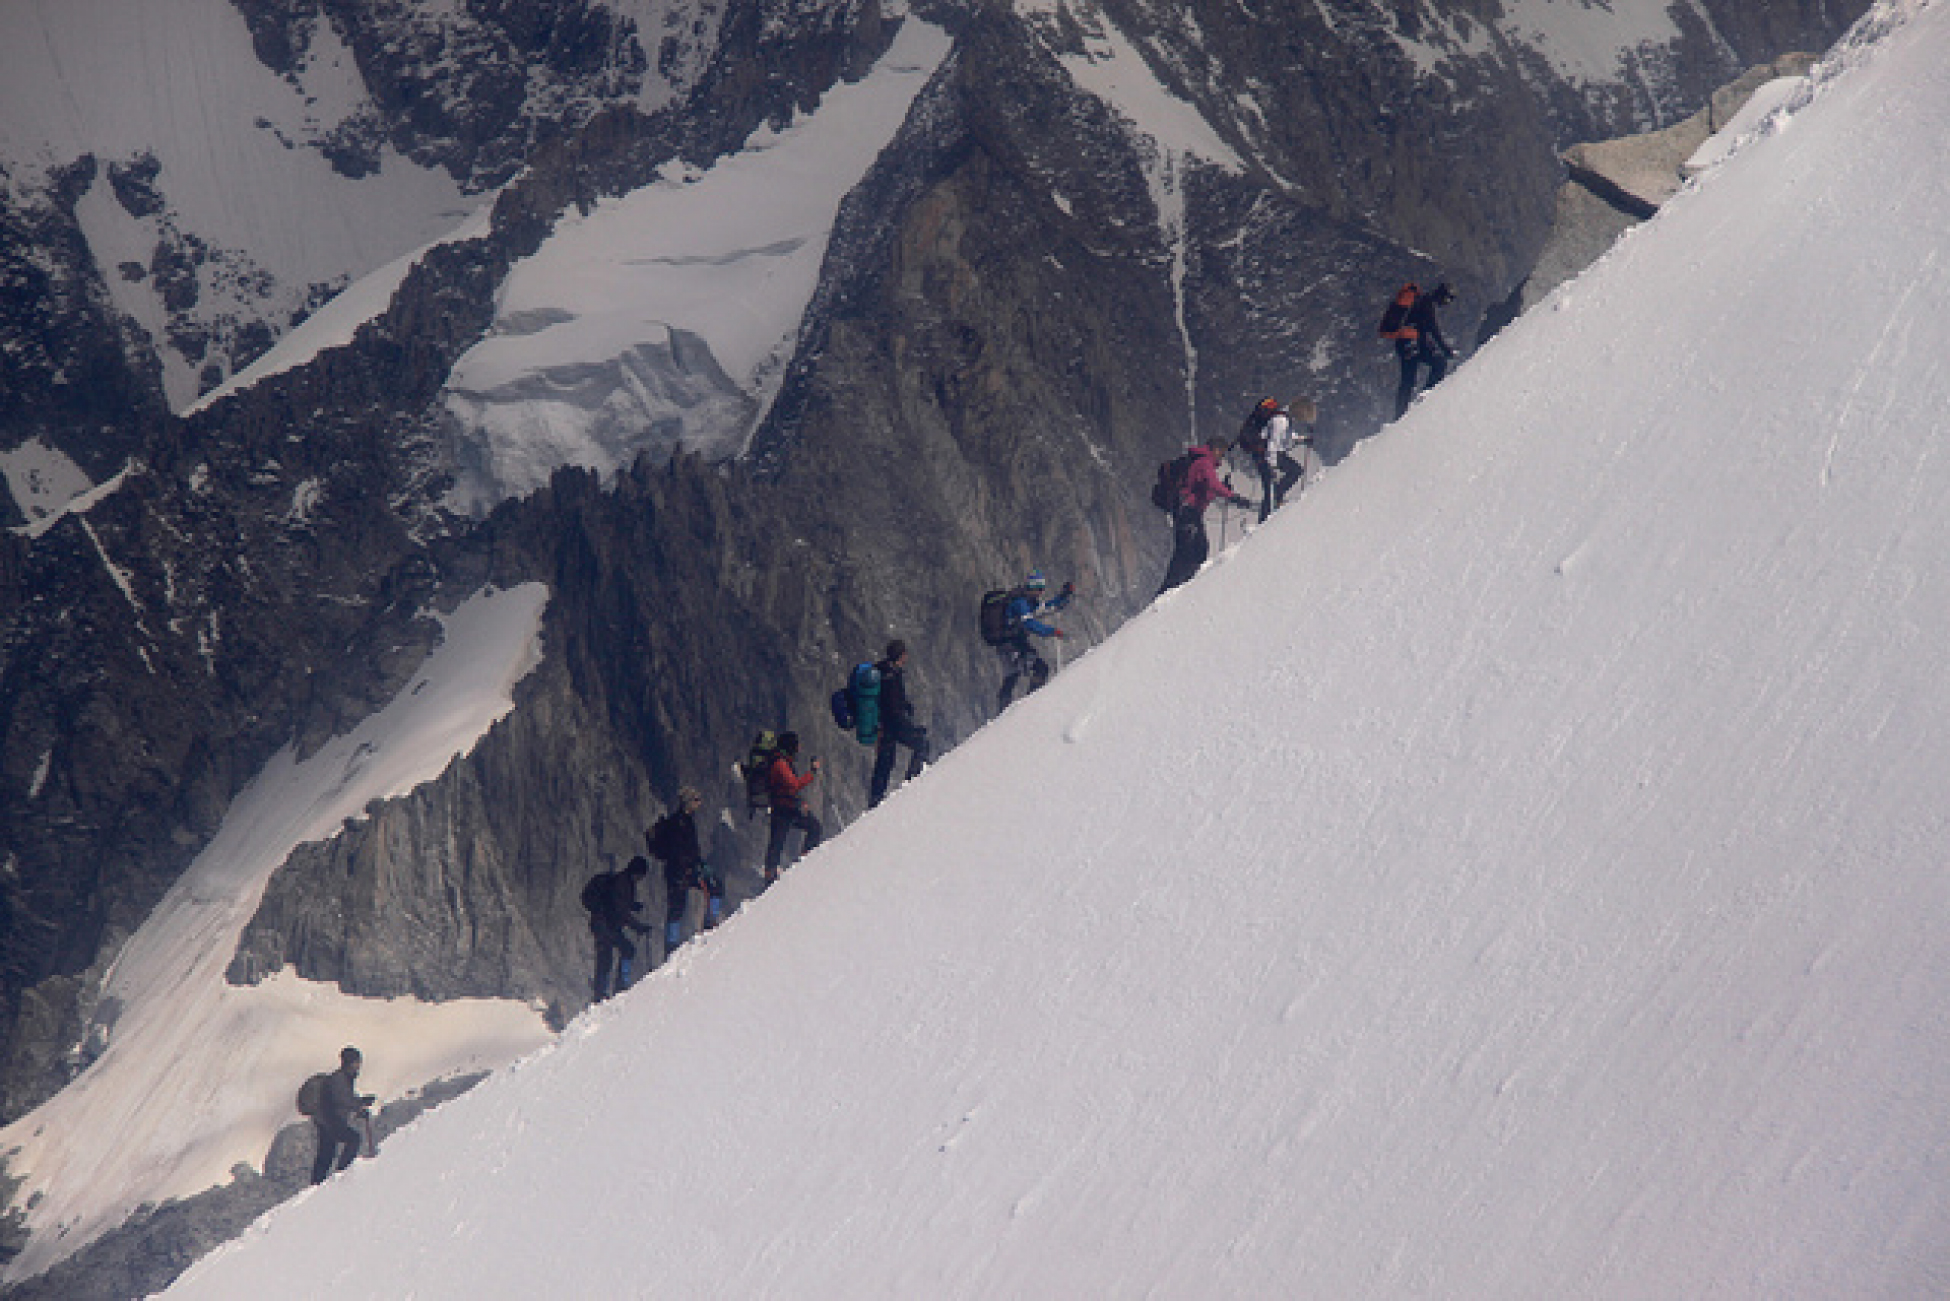 Mountain climbers ascending a snowy ridge in the French Alps.